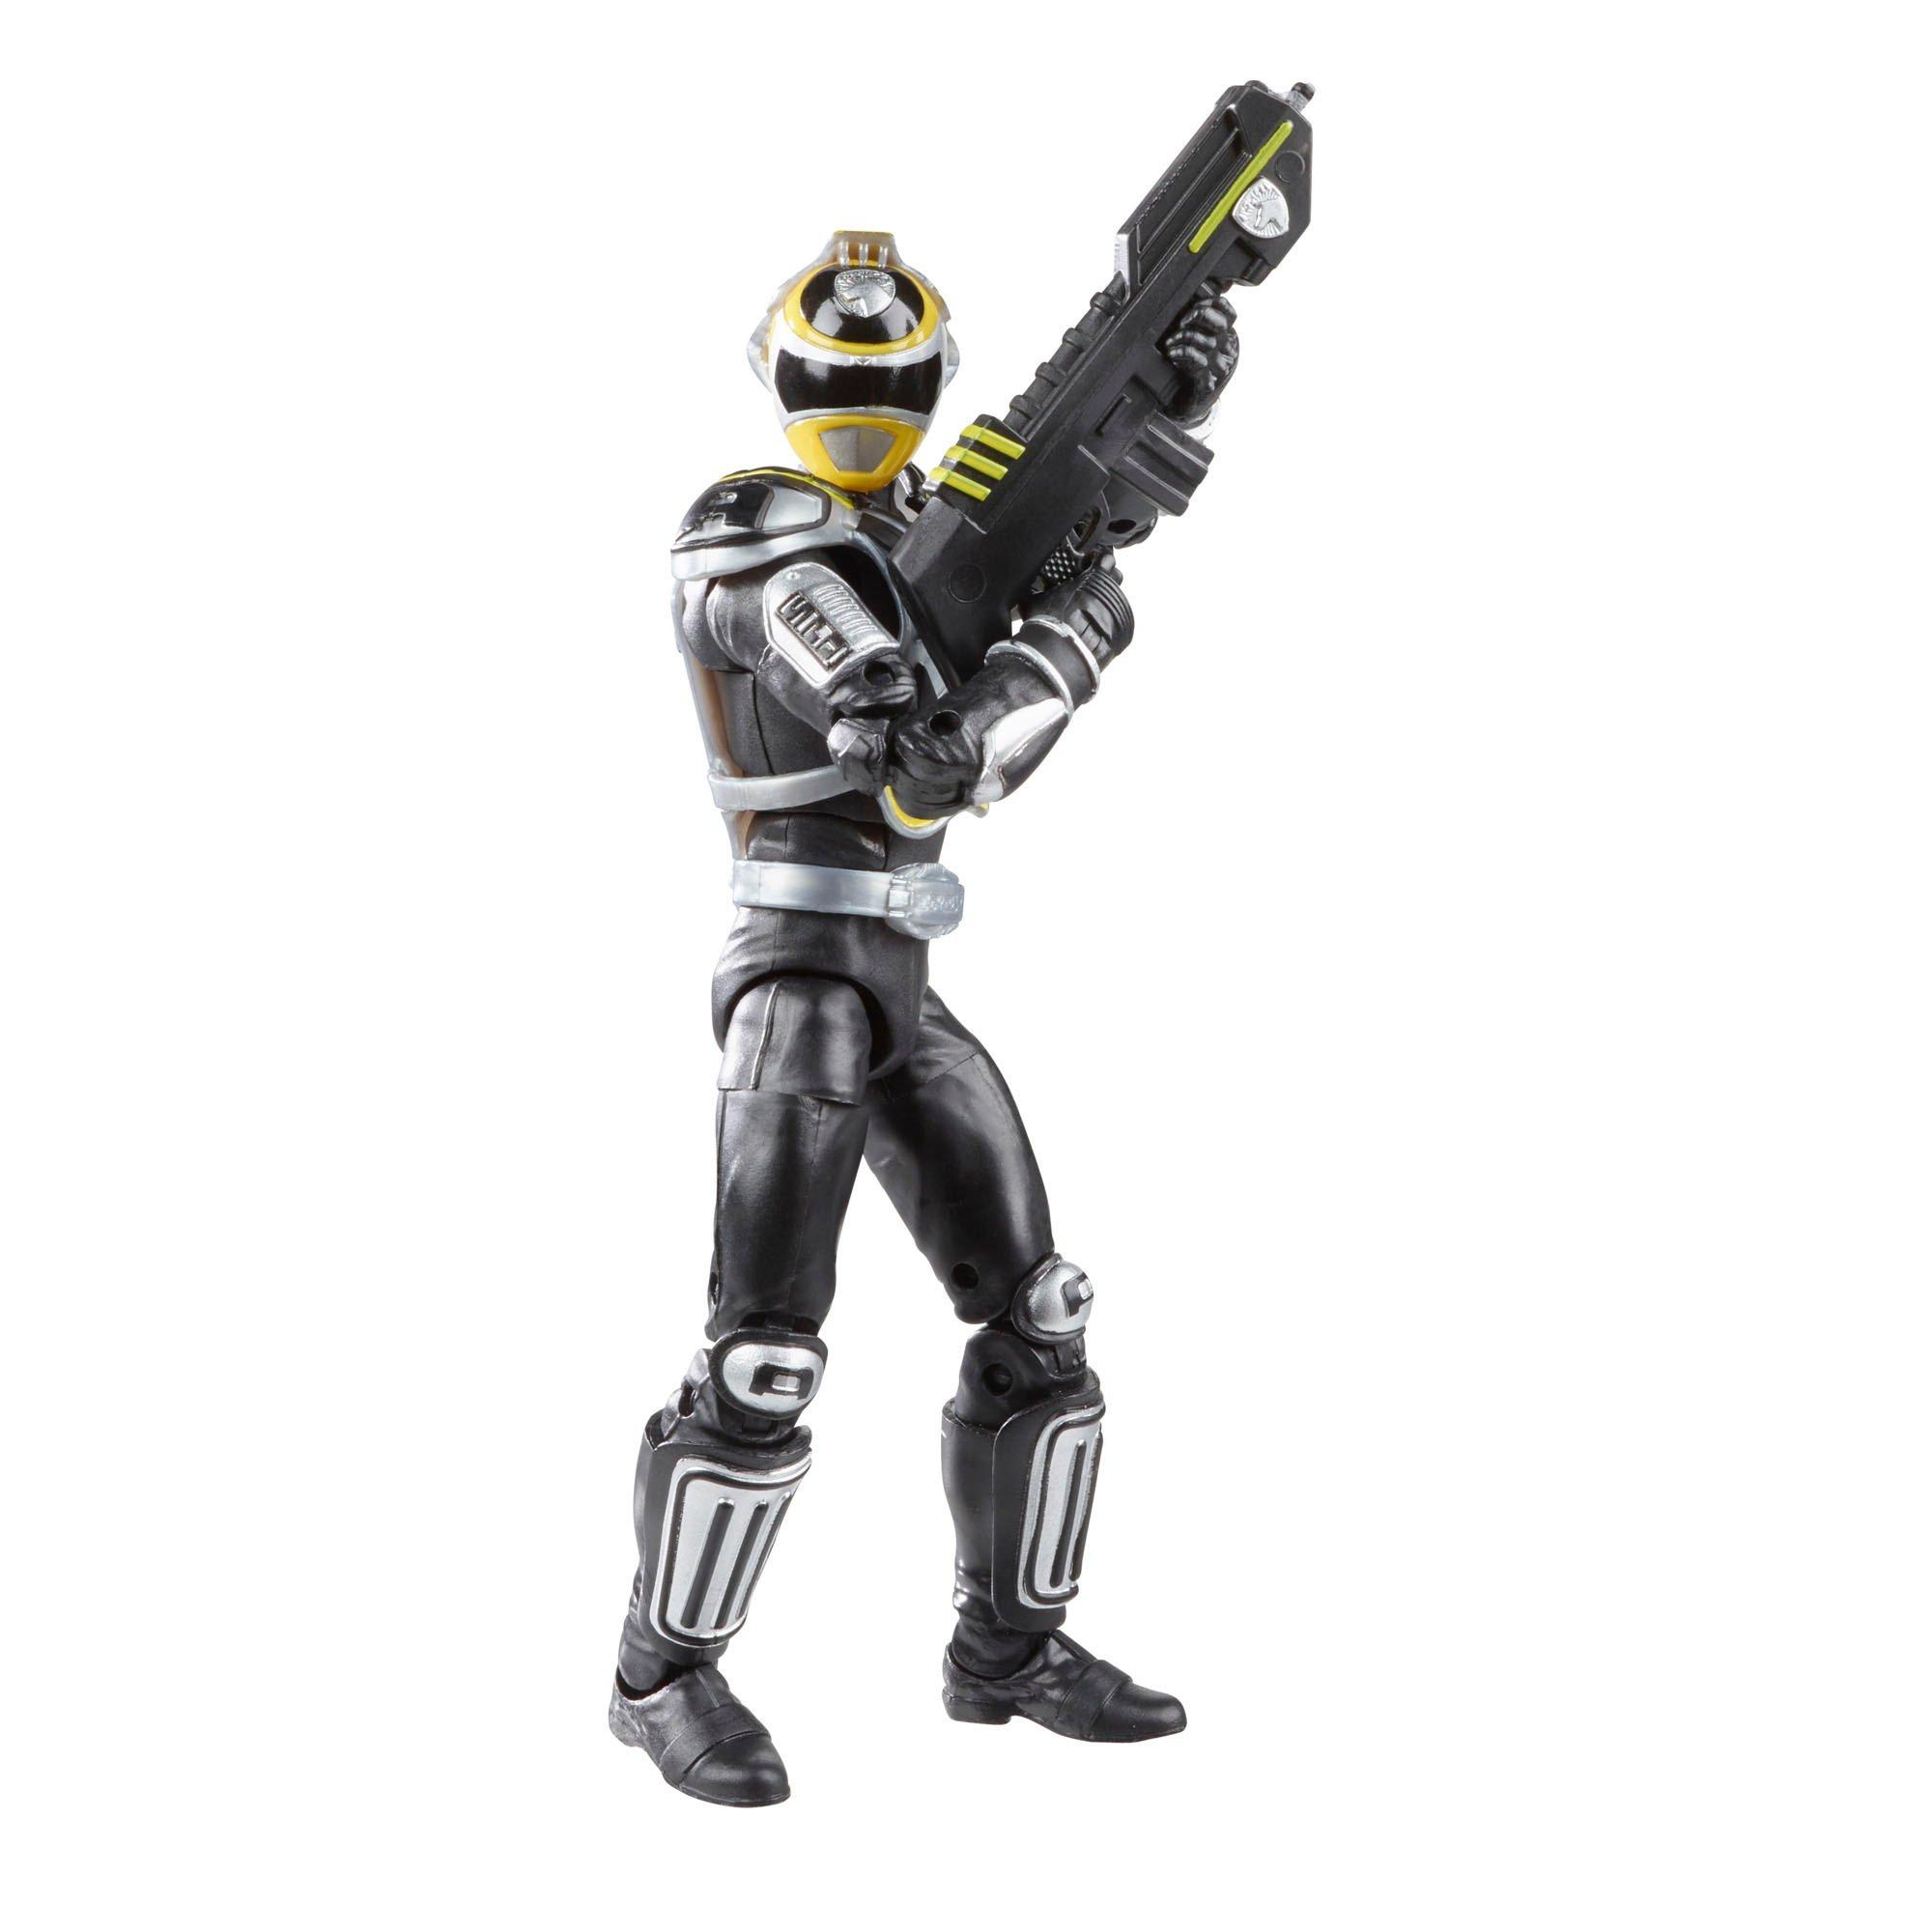 list item 2 of 8 Hasbro Power Rangers: Space Patrol Delta Yellow Ranger Lightning Collection 6-in Action Figure